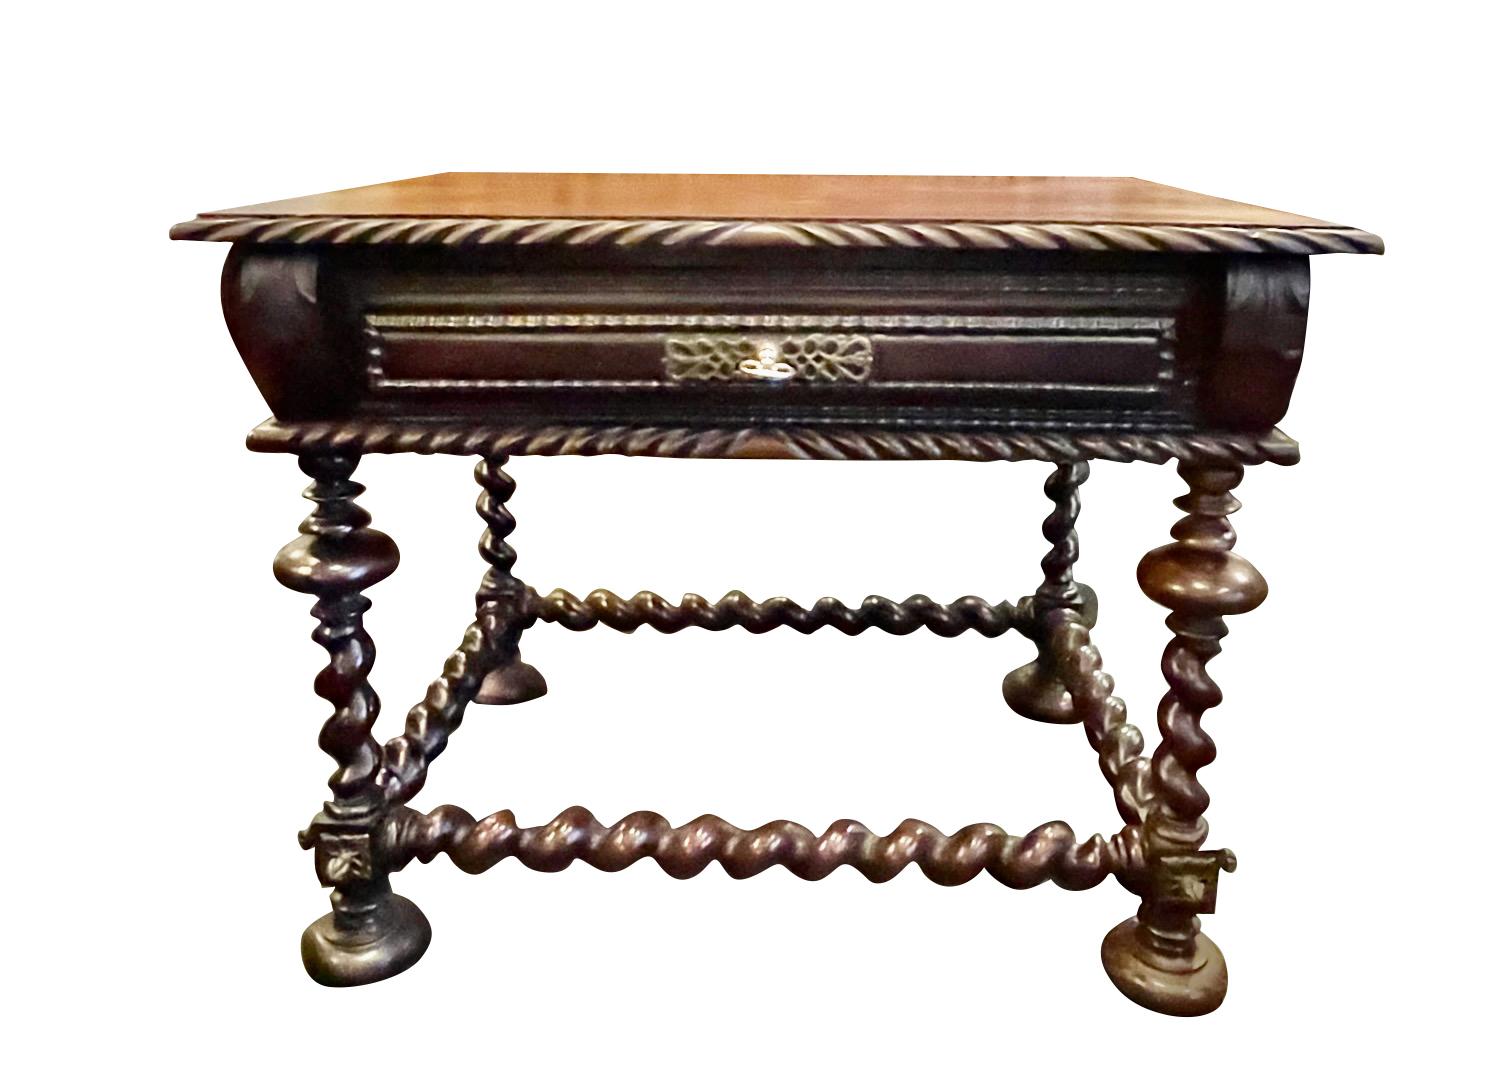 18th century Portuguese side table with two drawers.
Unusual smaller size makes a great side table.
Classic decorative trim with ornate brass details.
Barley twist legs and stretcher.
Palissandre wood.